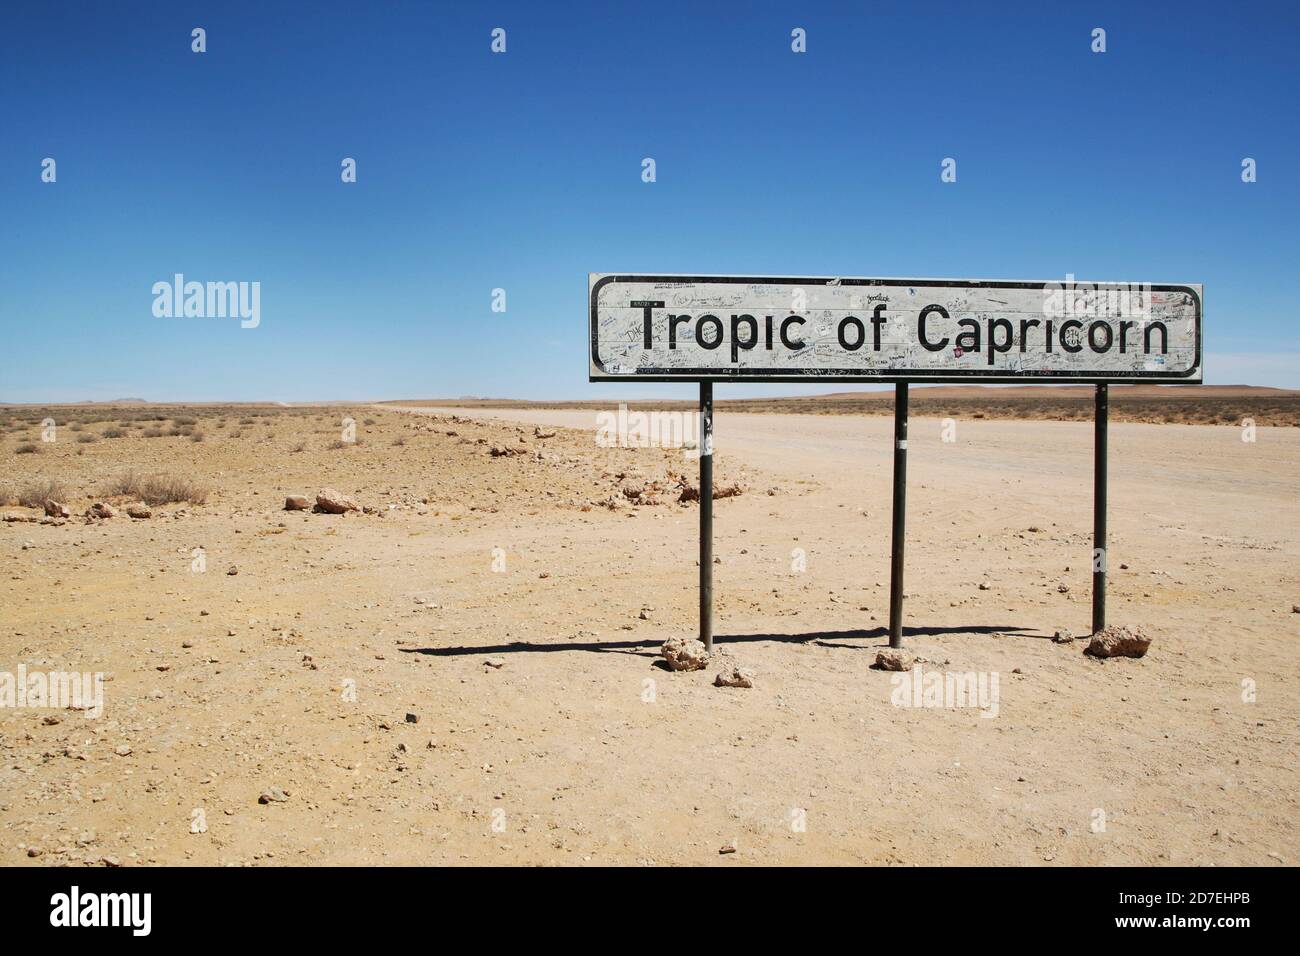 Tropic of Capricorn sign in Namibia Stock Photo